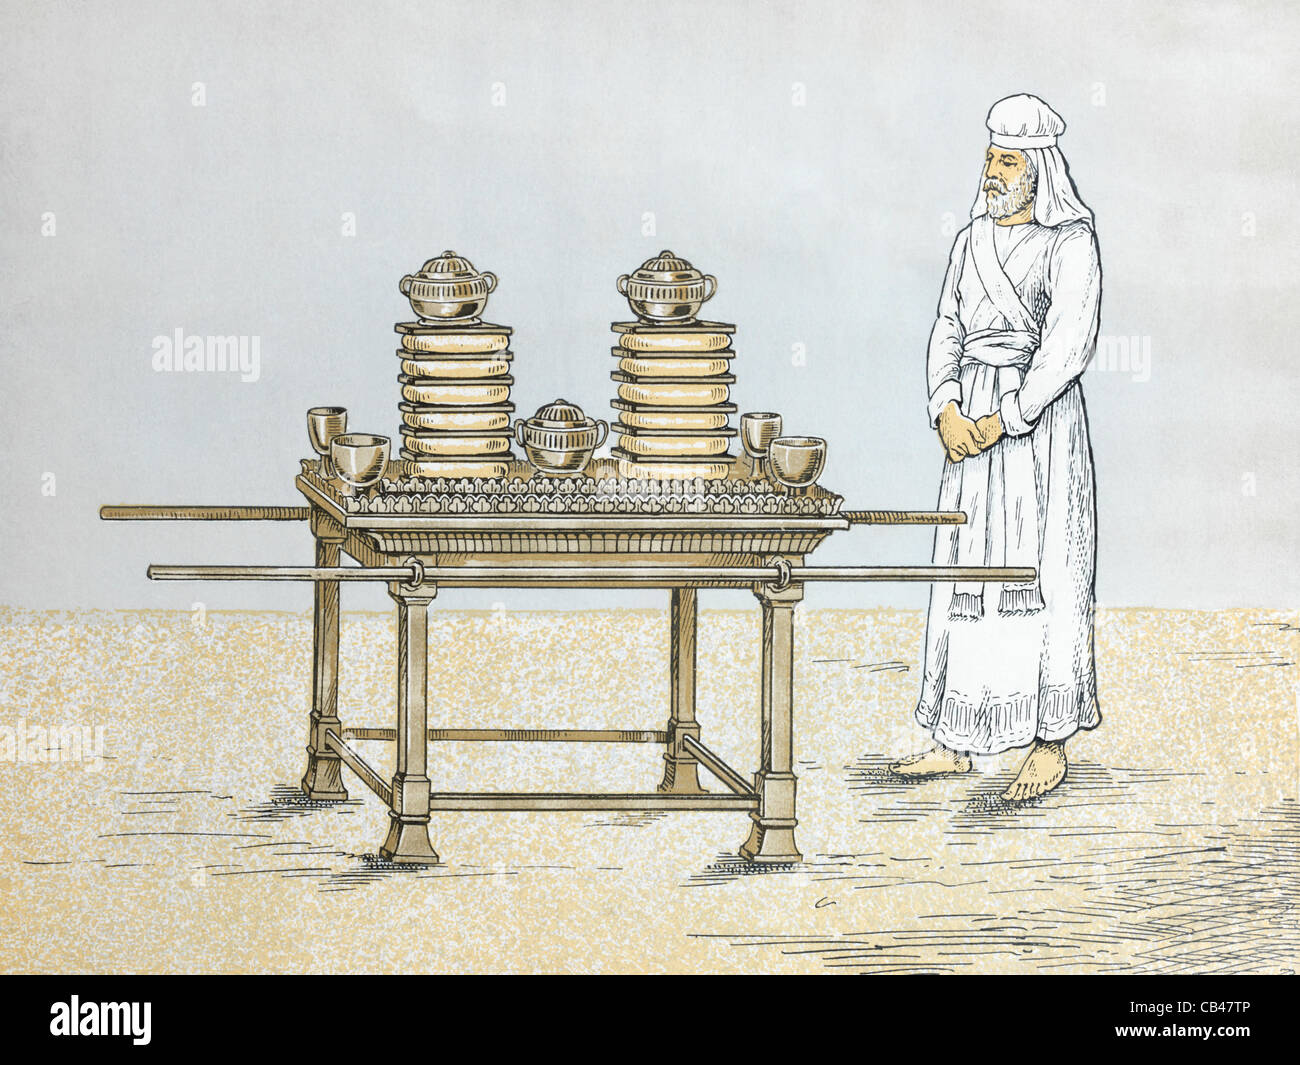 An Illustration Of The High Priest Standing next to the Table Of The Shewbread - 12 Loves of Bread Representing the 12 Tribes of Israel Stock Photo